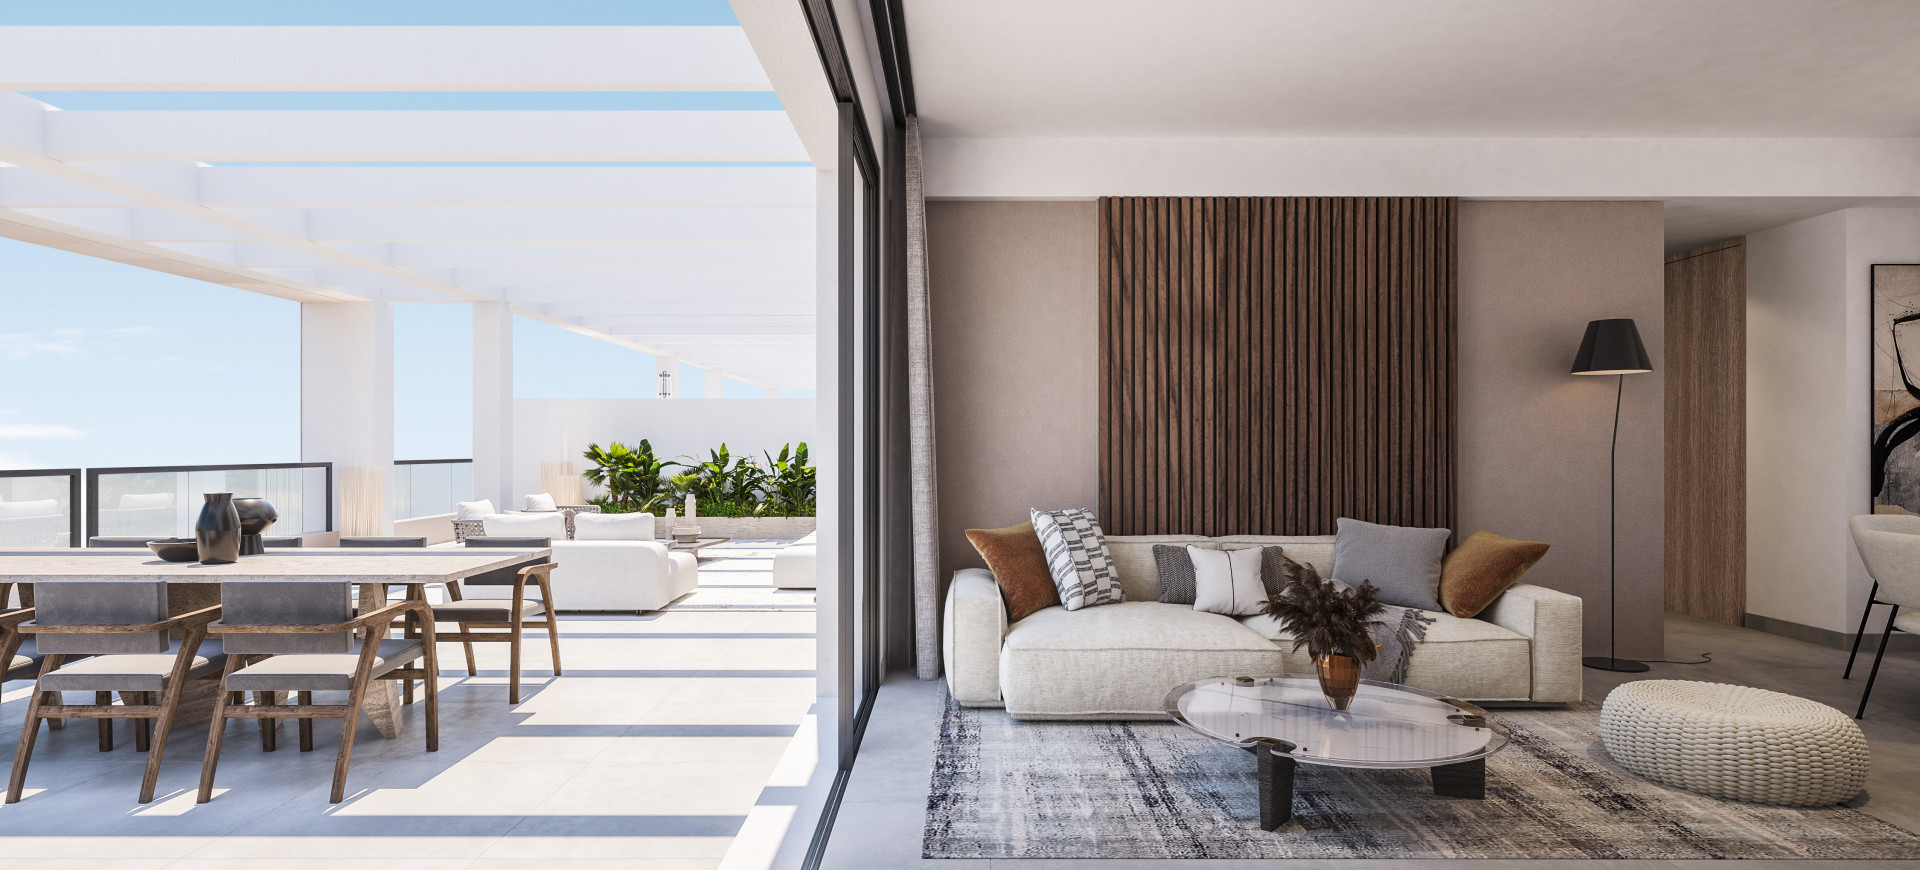 Dream Golf Calanova: Luxury residential project located on the first line of the Calanova golf course in the municipality of Mijas, Malaga. | Image 7